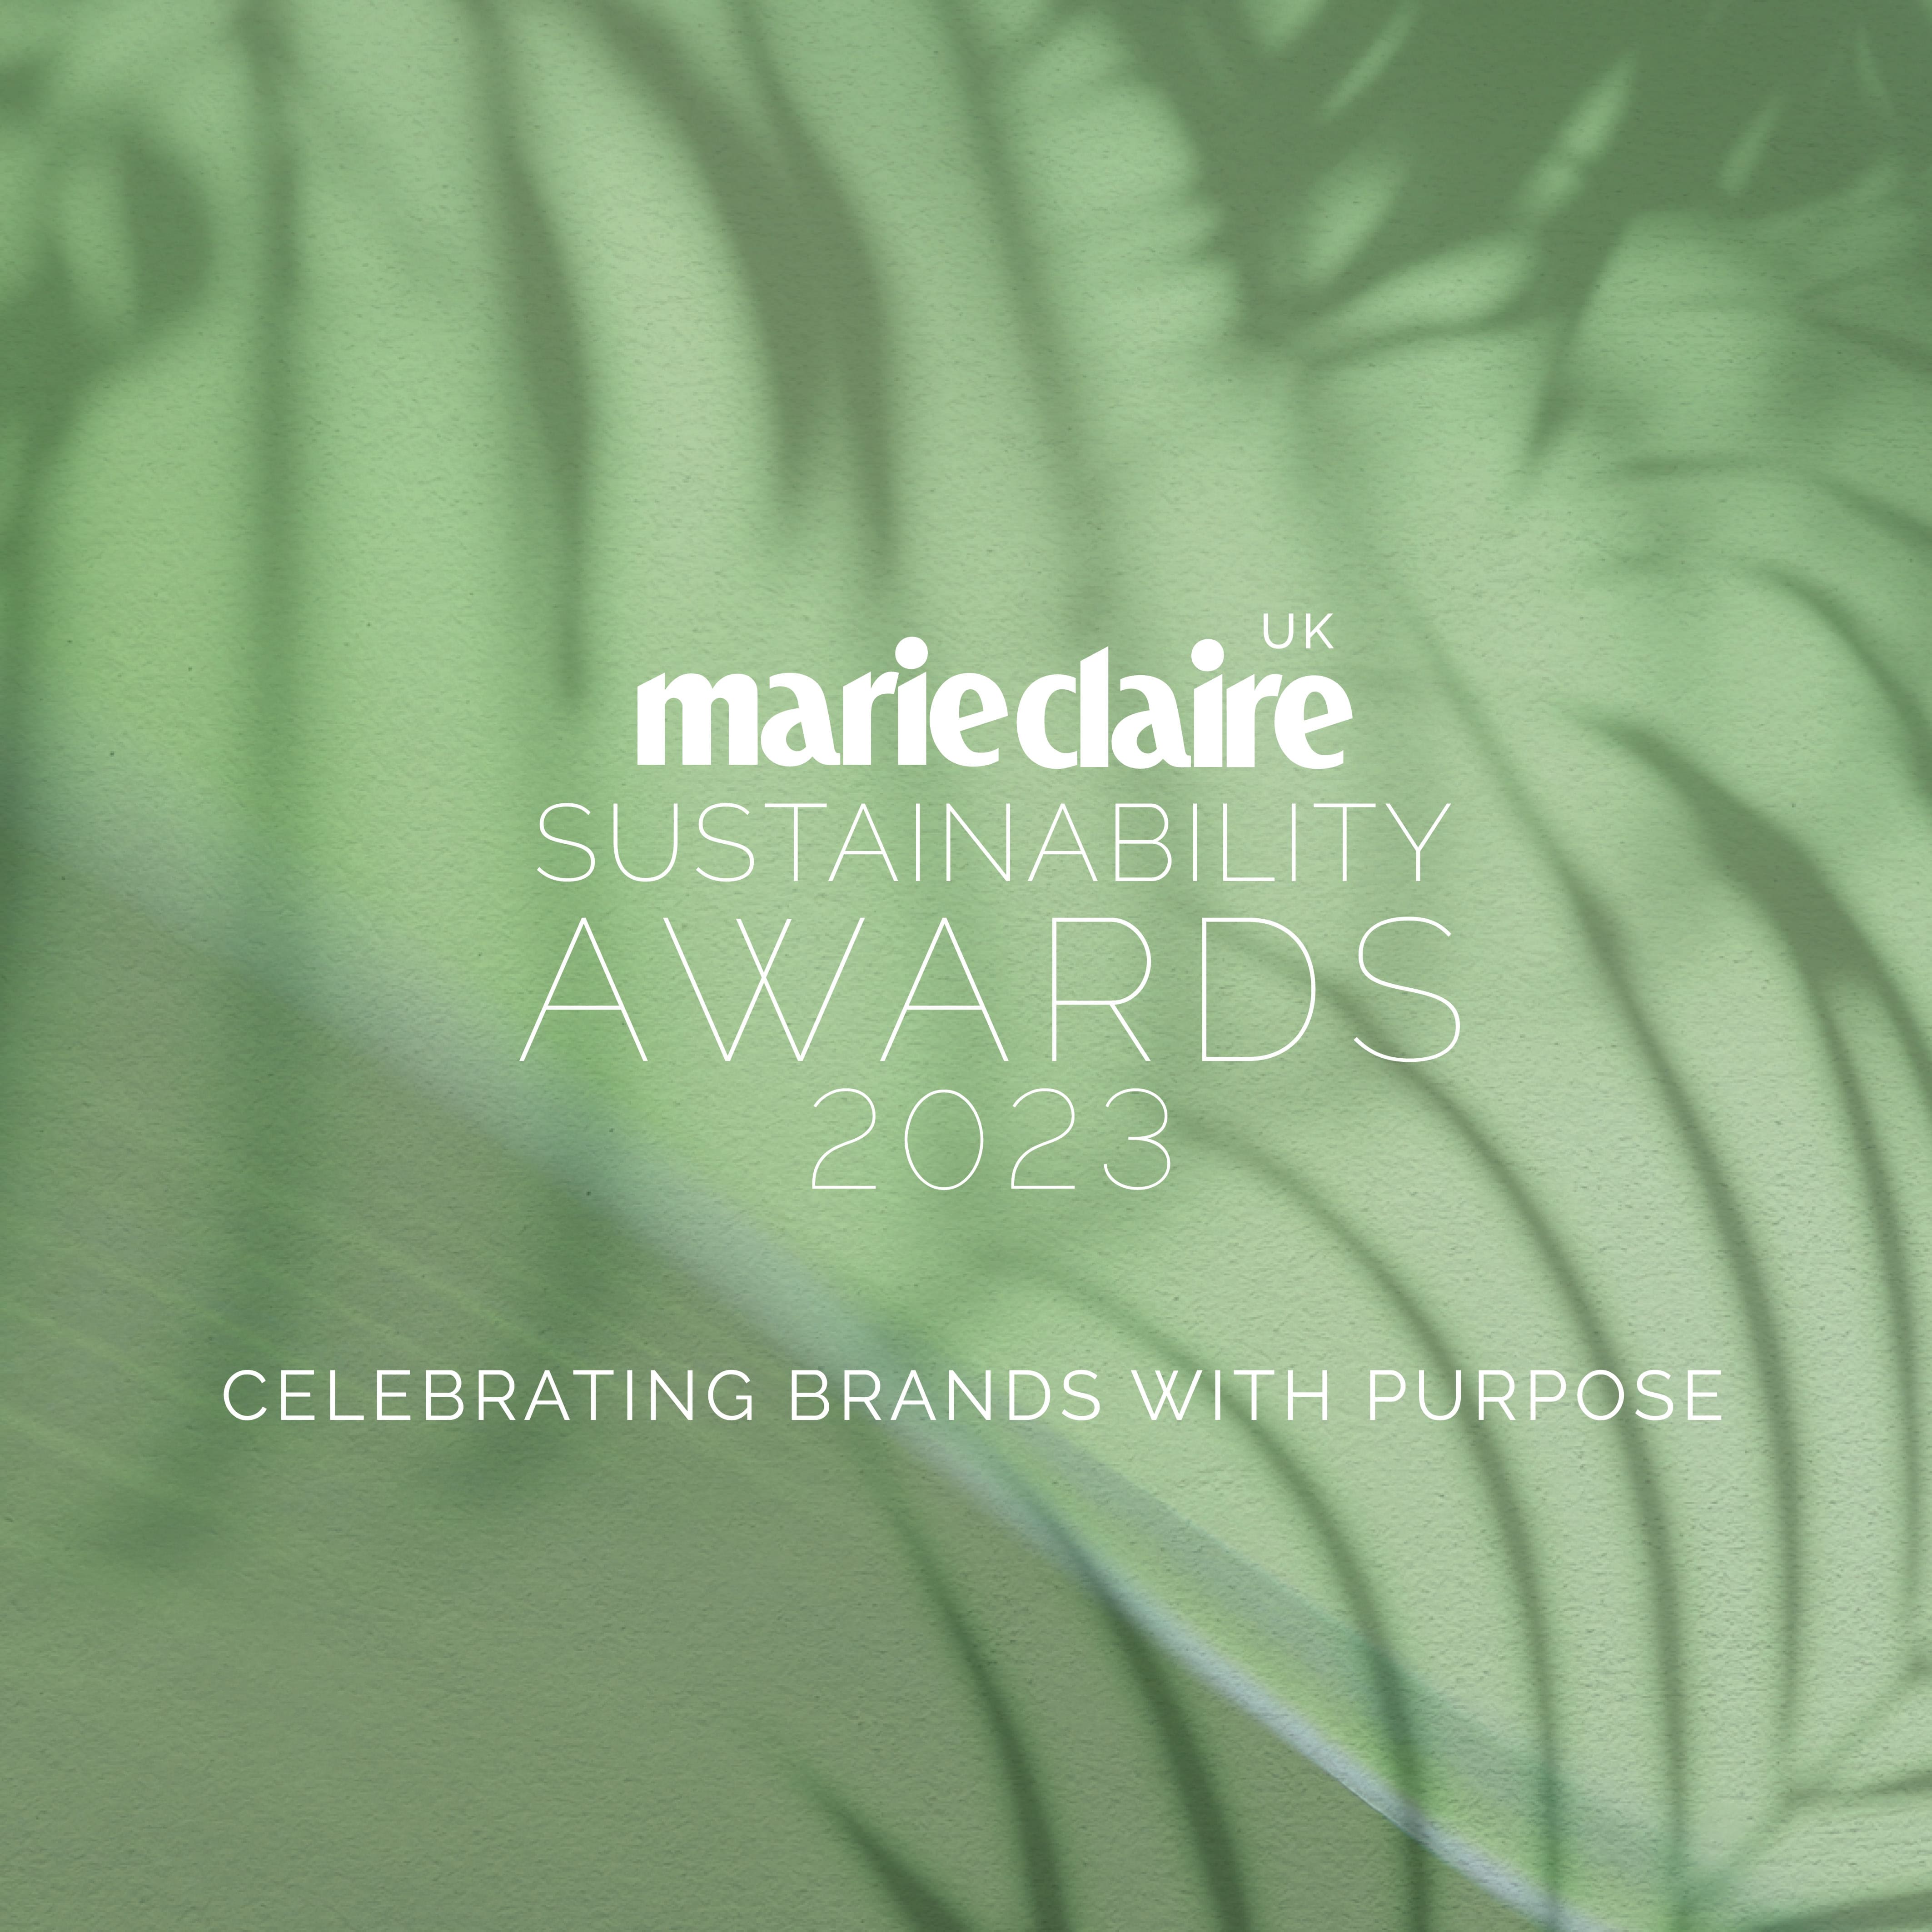 Our third annual Marie Claire